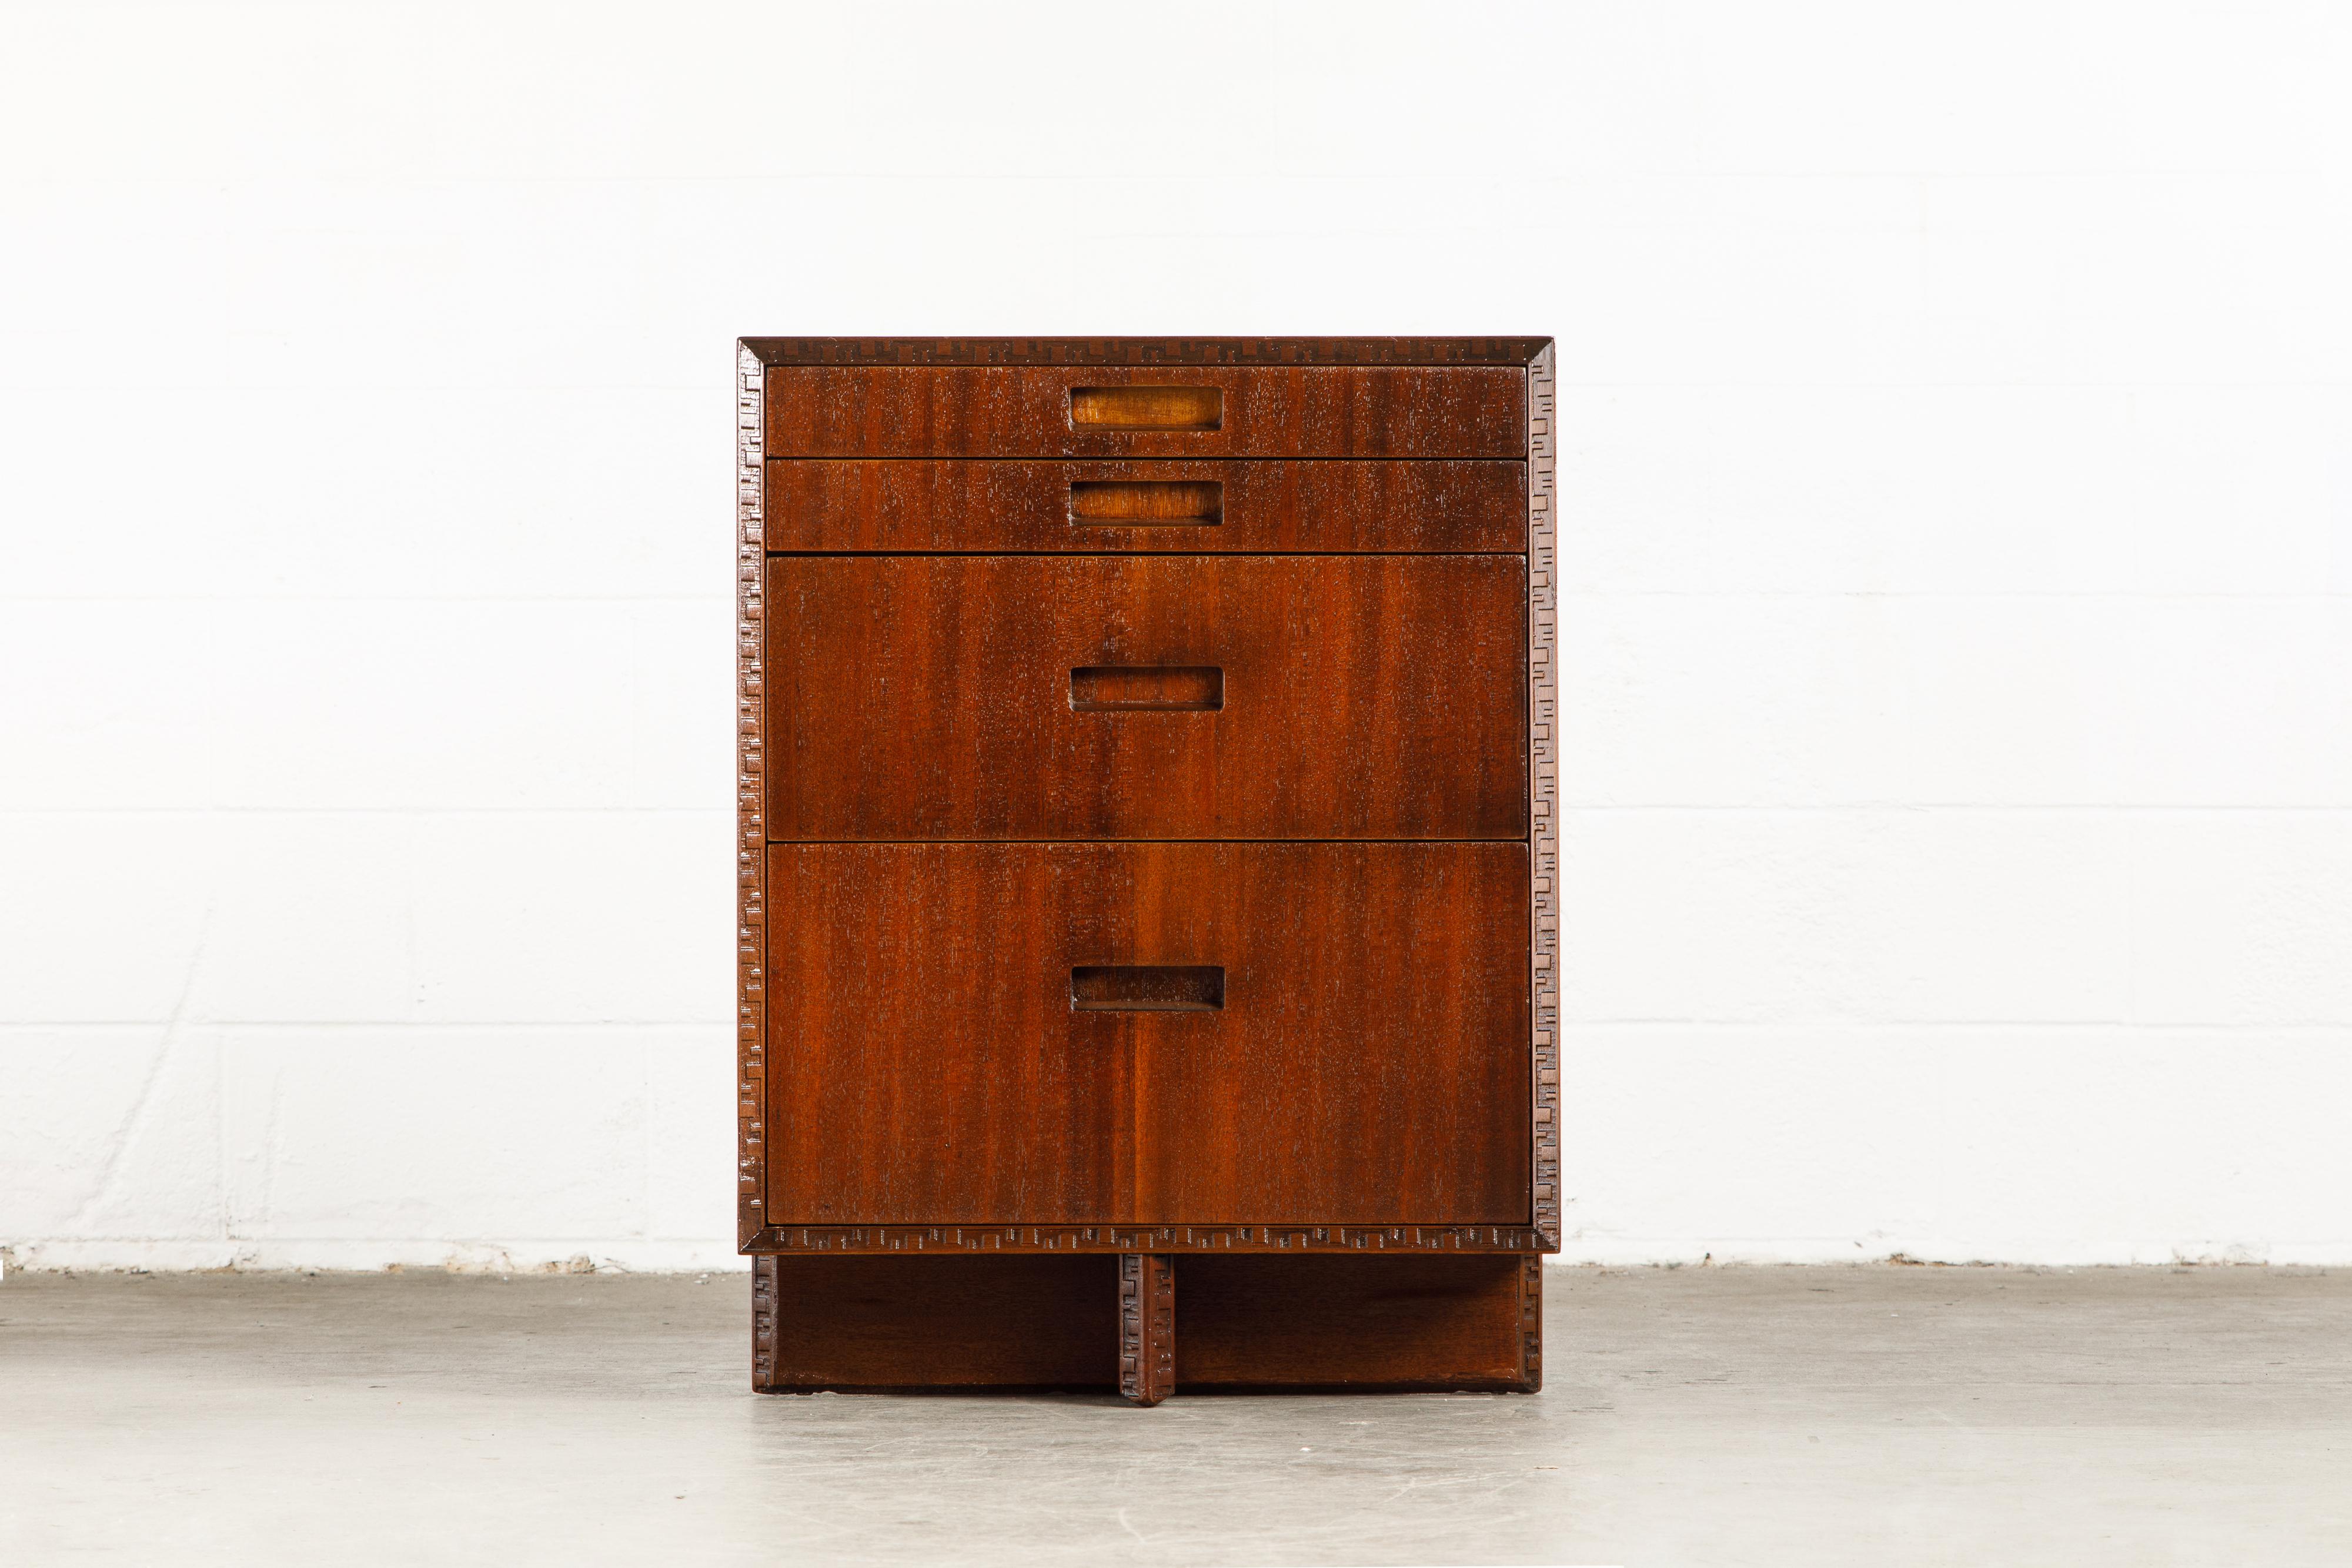 This pair of gorgeously refinished Honduran Mahogany 'Taliesin' cabinets were designed by Frank Lloyd Wright for Heritage-Henredon in 1955 and produced only for two years, therefore are now highly sought-after and rare collectors items. These